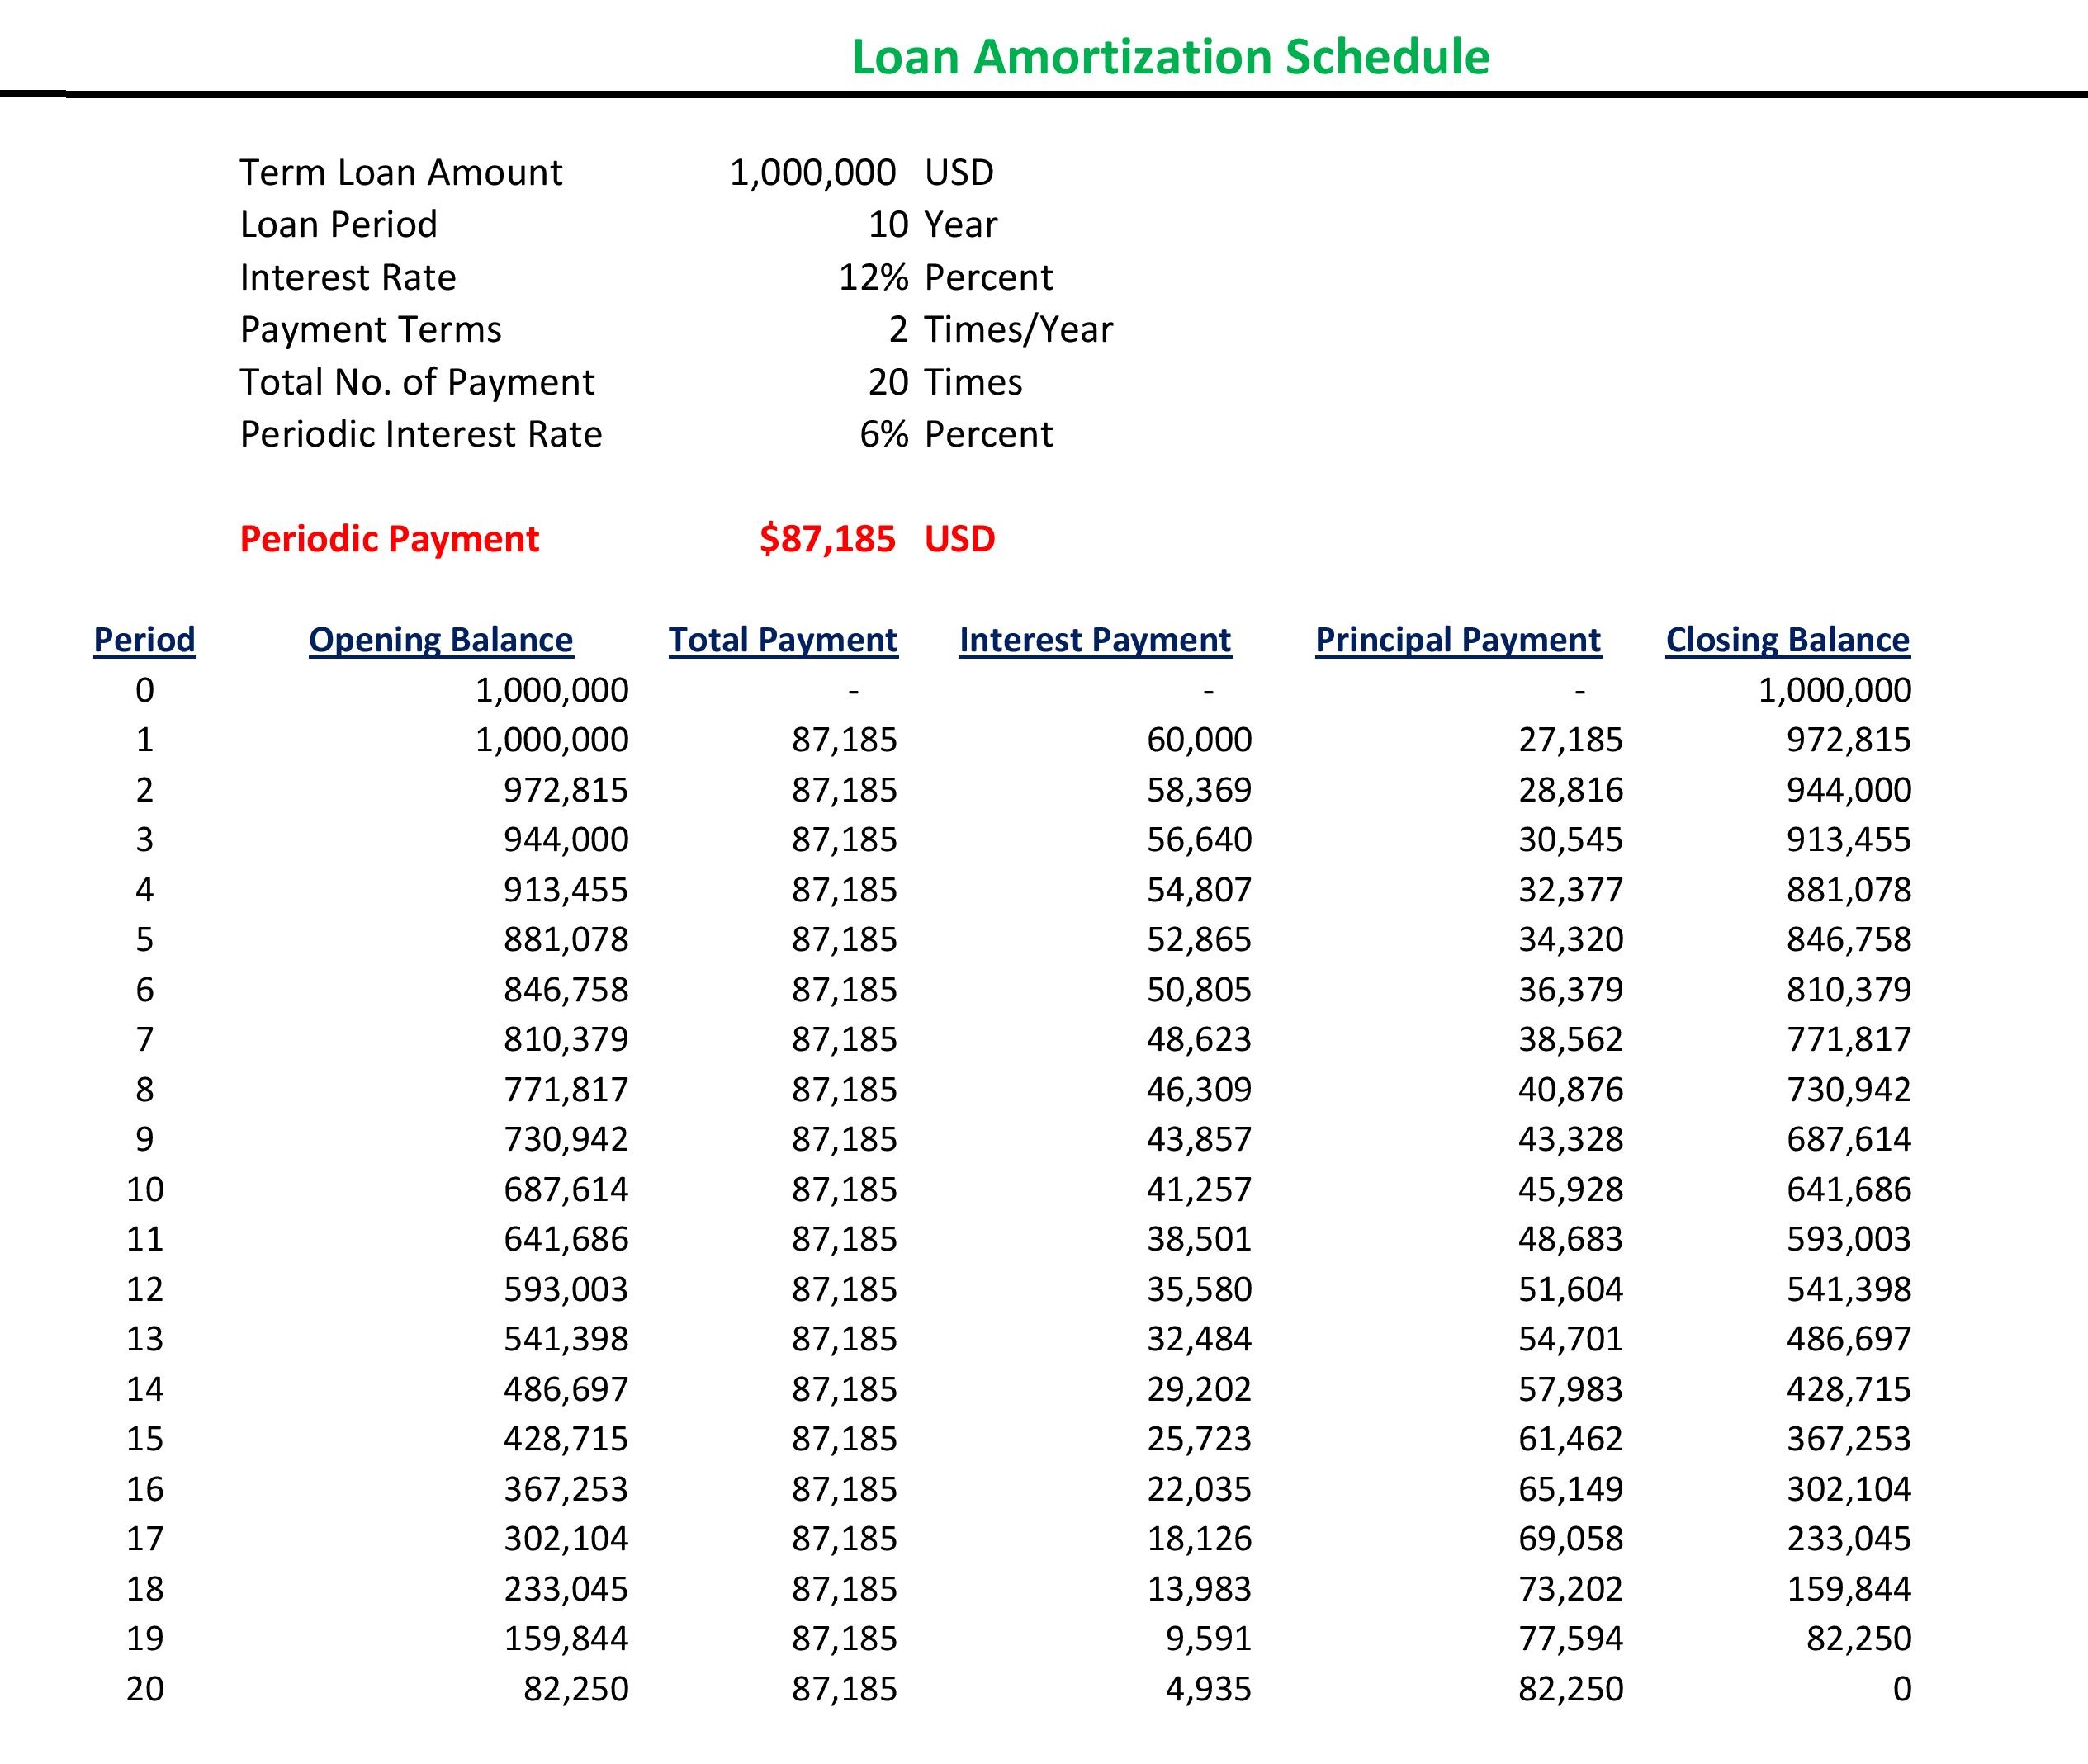 How to Make Loan Amortization Schedule in Excel